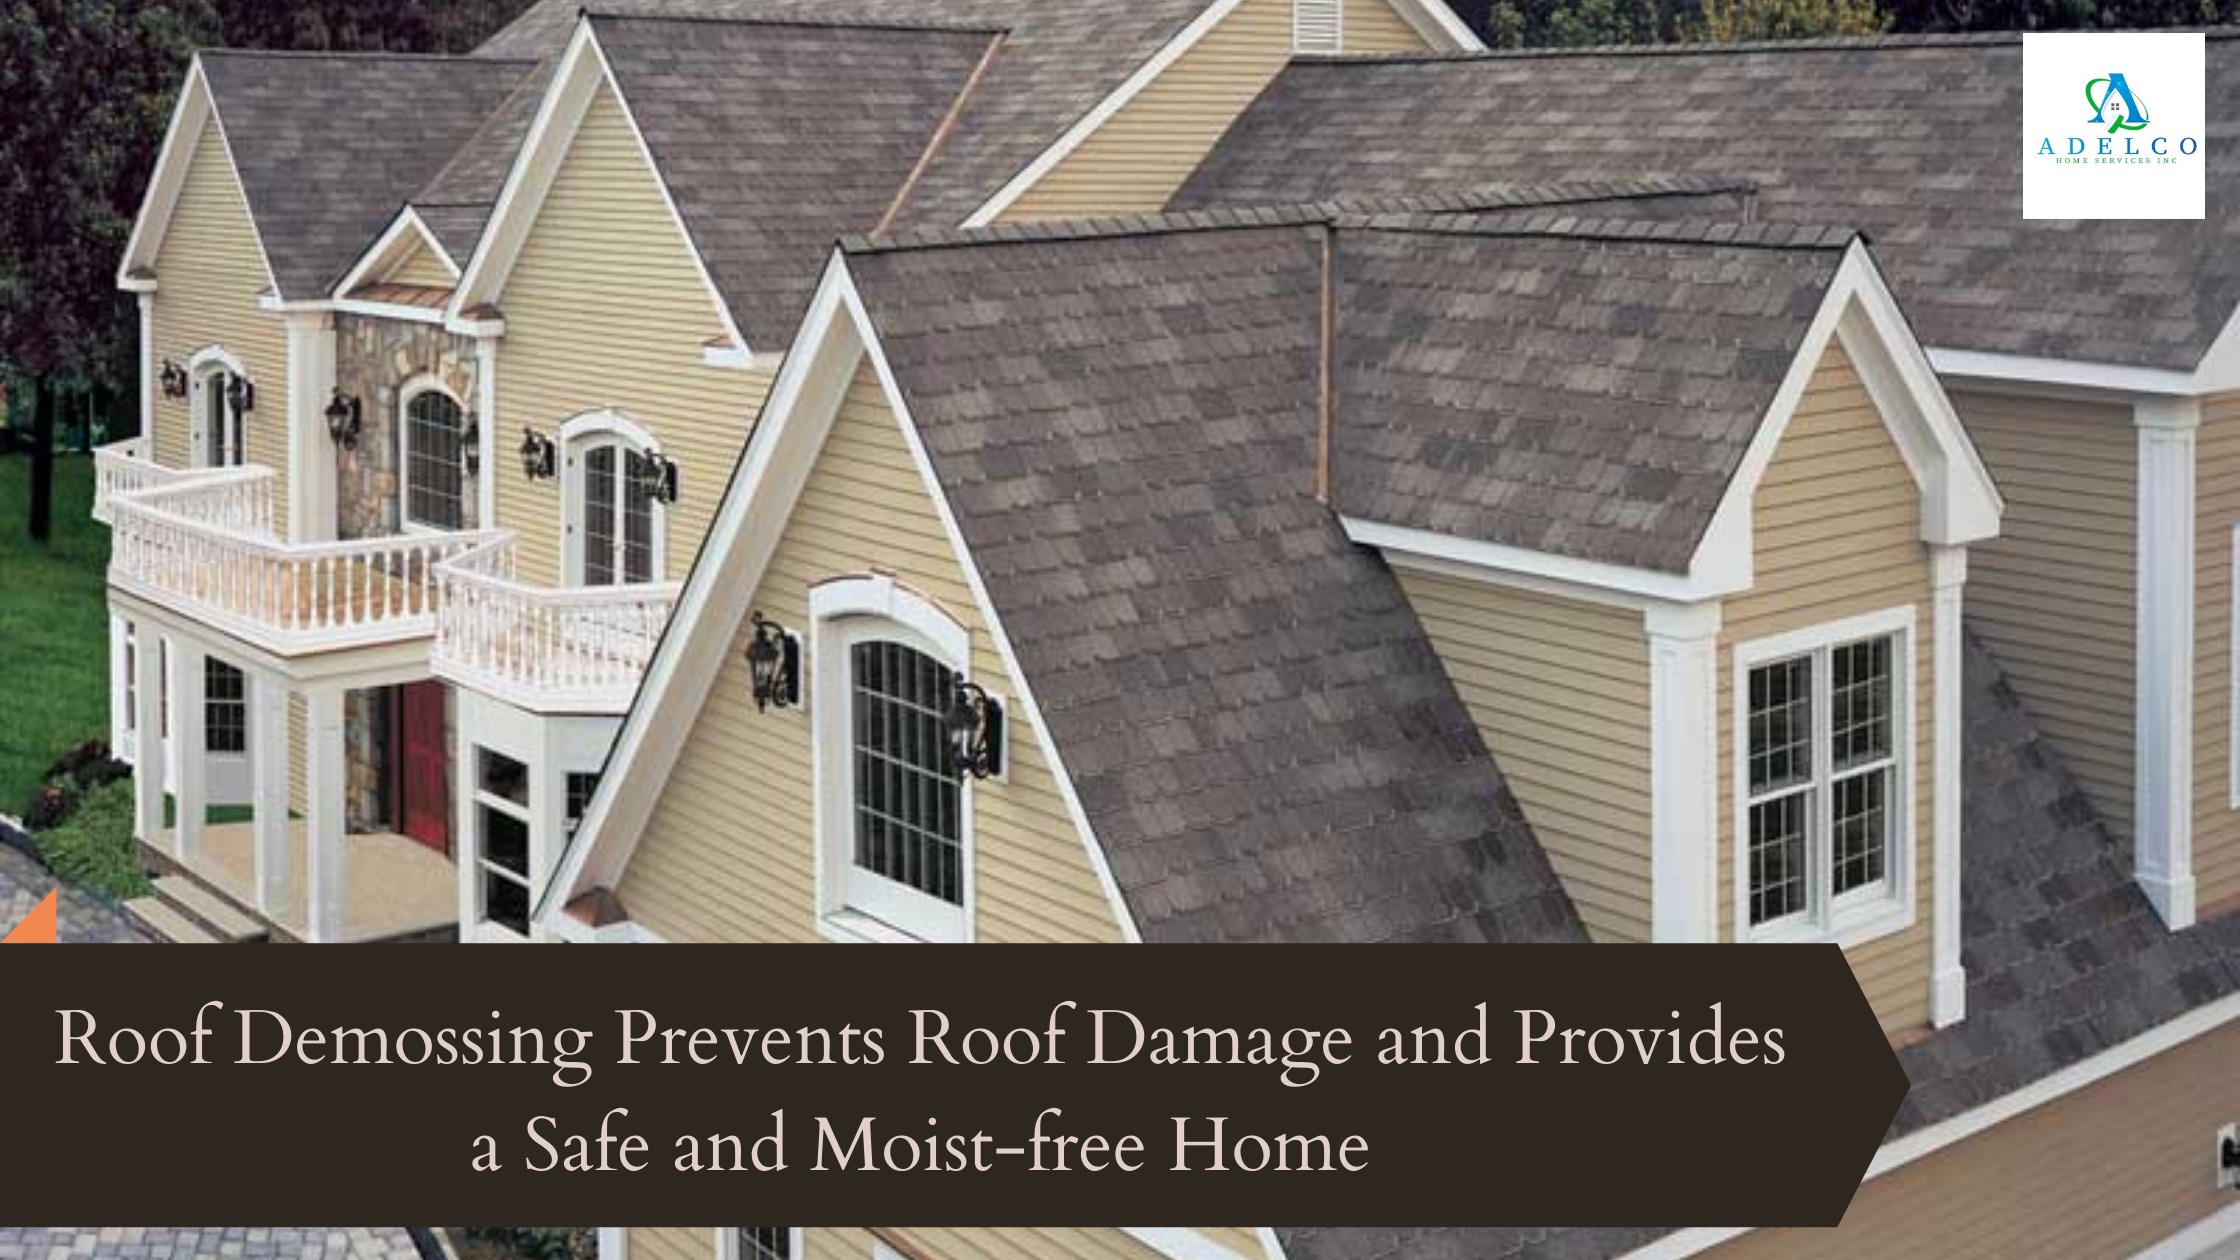 Roof Demossing Prevents Roof Damage